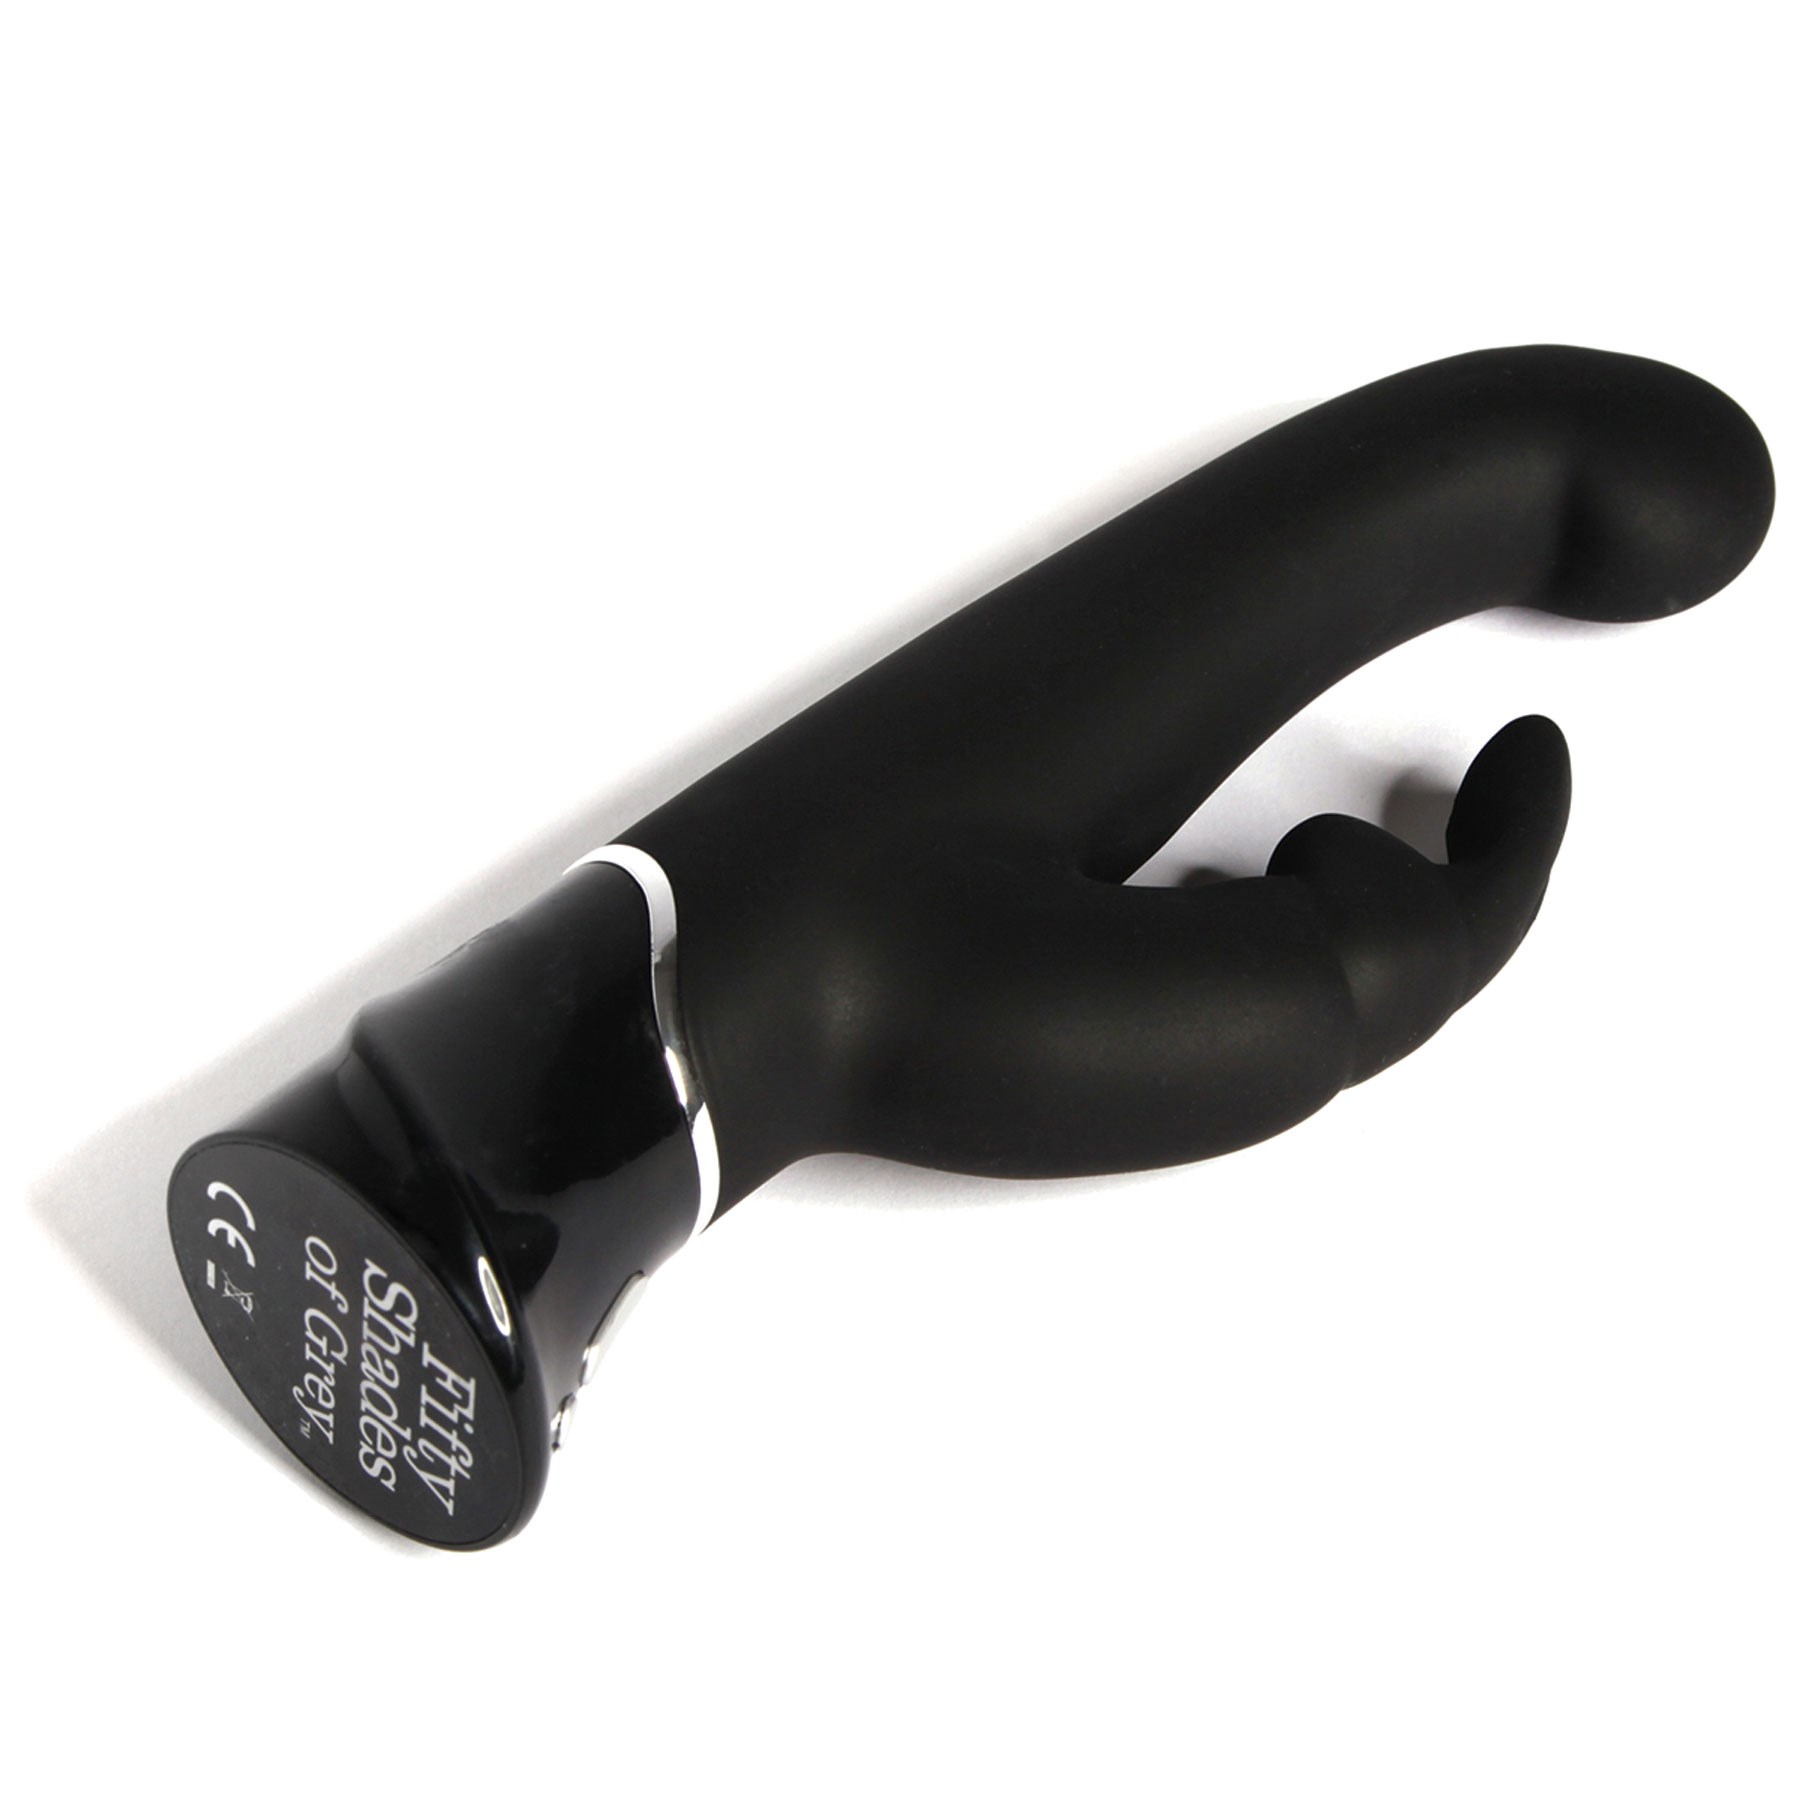 Fifty Shades of Grey Greedy Girl G-Spot Rabbit Vibrator laying on side